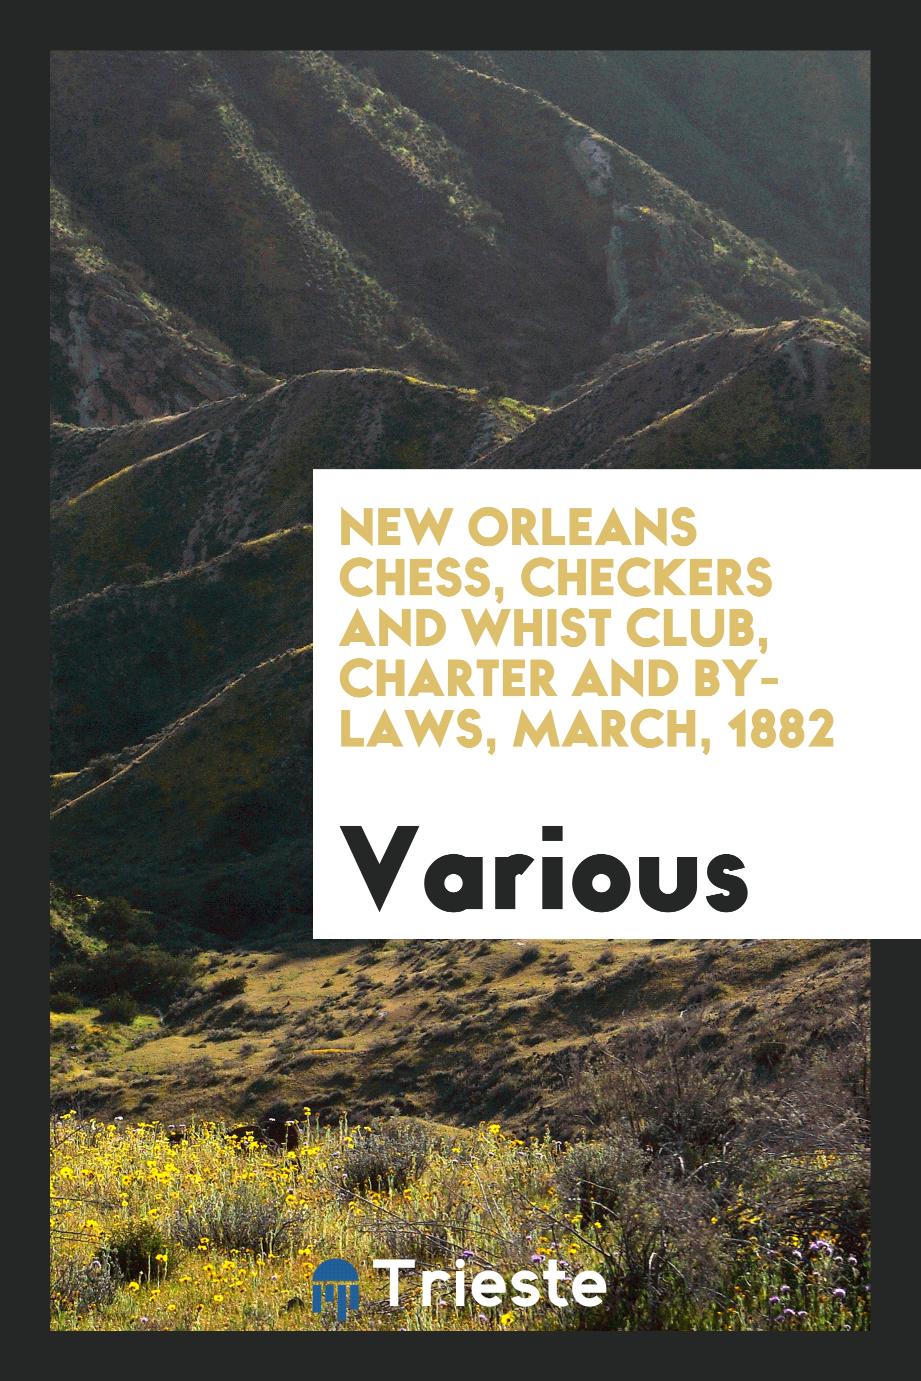 New Orleans Chess, Checkers and Whist Club, Charter and By-laws, March, 1882